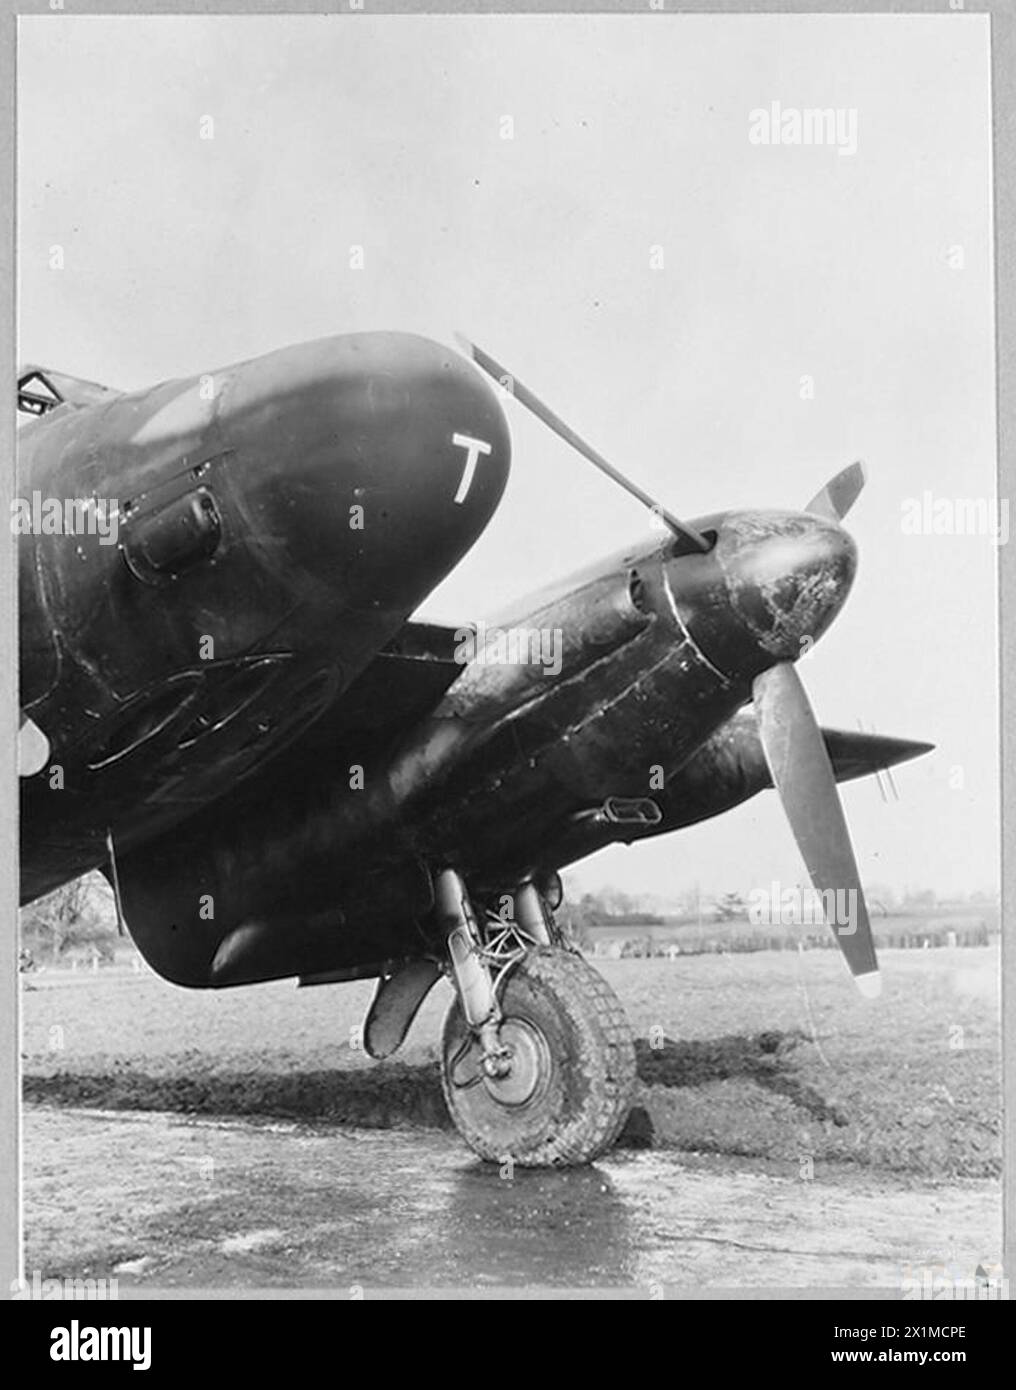 THE MOSQUITO MARK XIII NIGHTFIGHTER. - Picture issued 1945.The nose of the Mosquito Mk.XIll night fighter, Royal Air Force Stock Photo